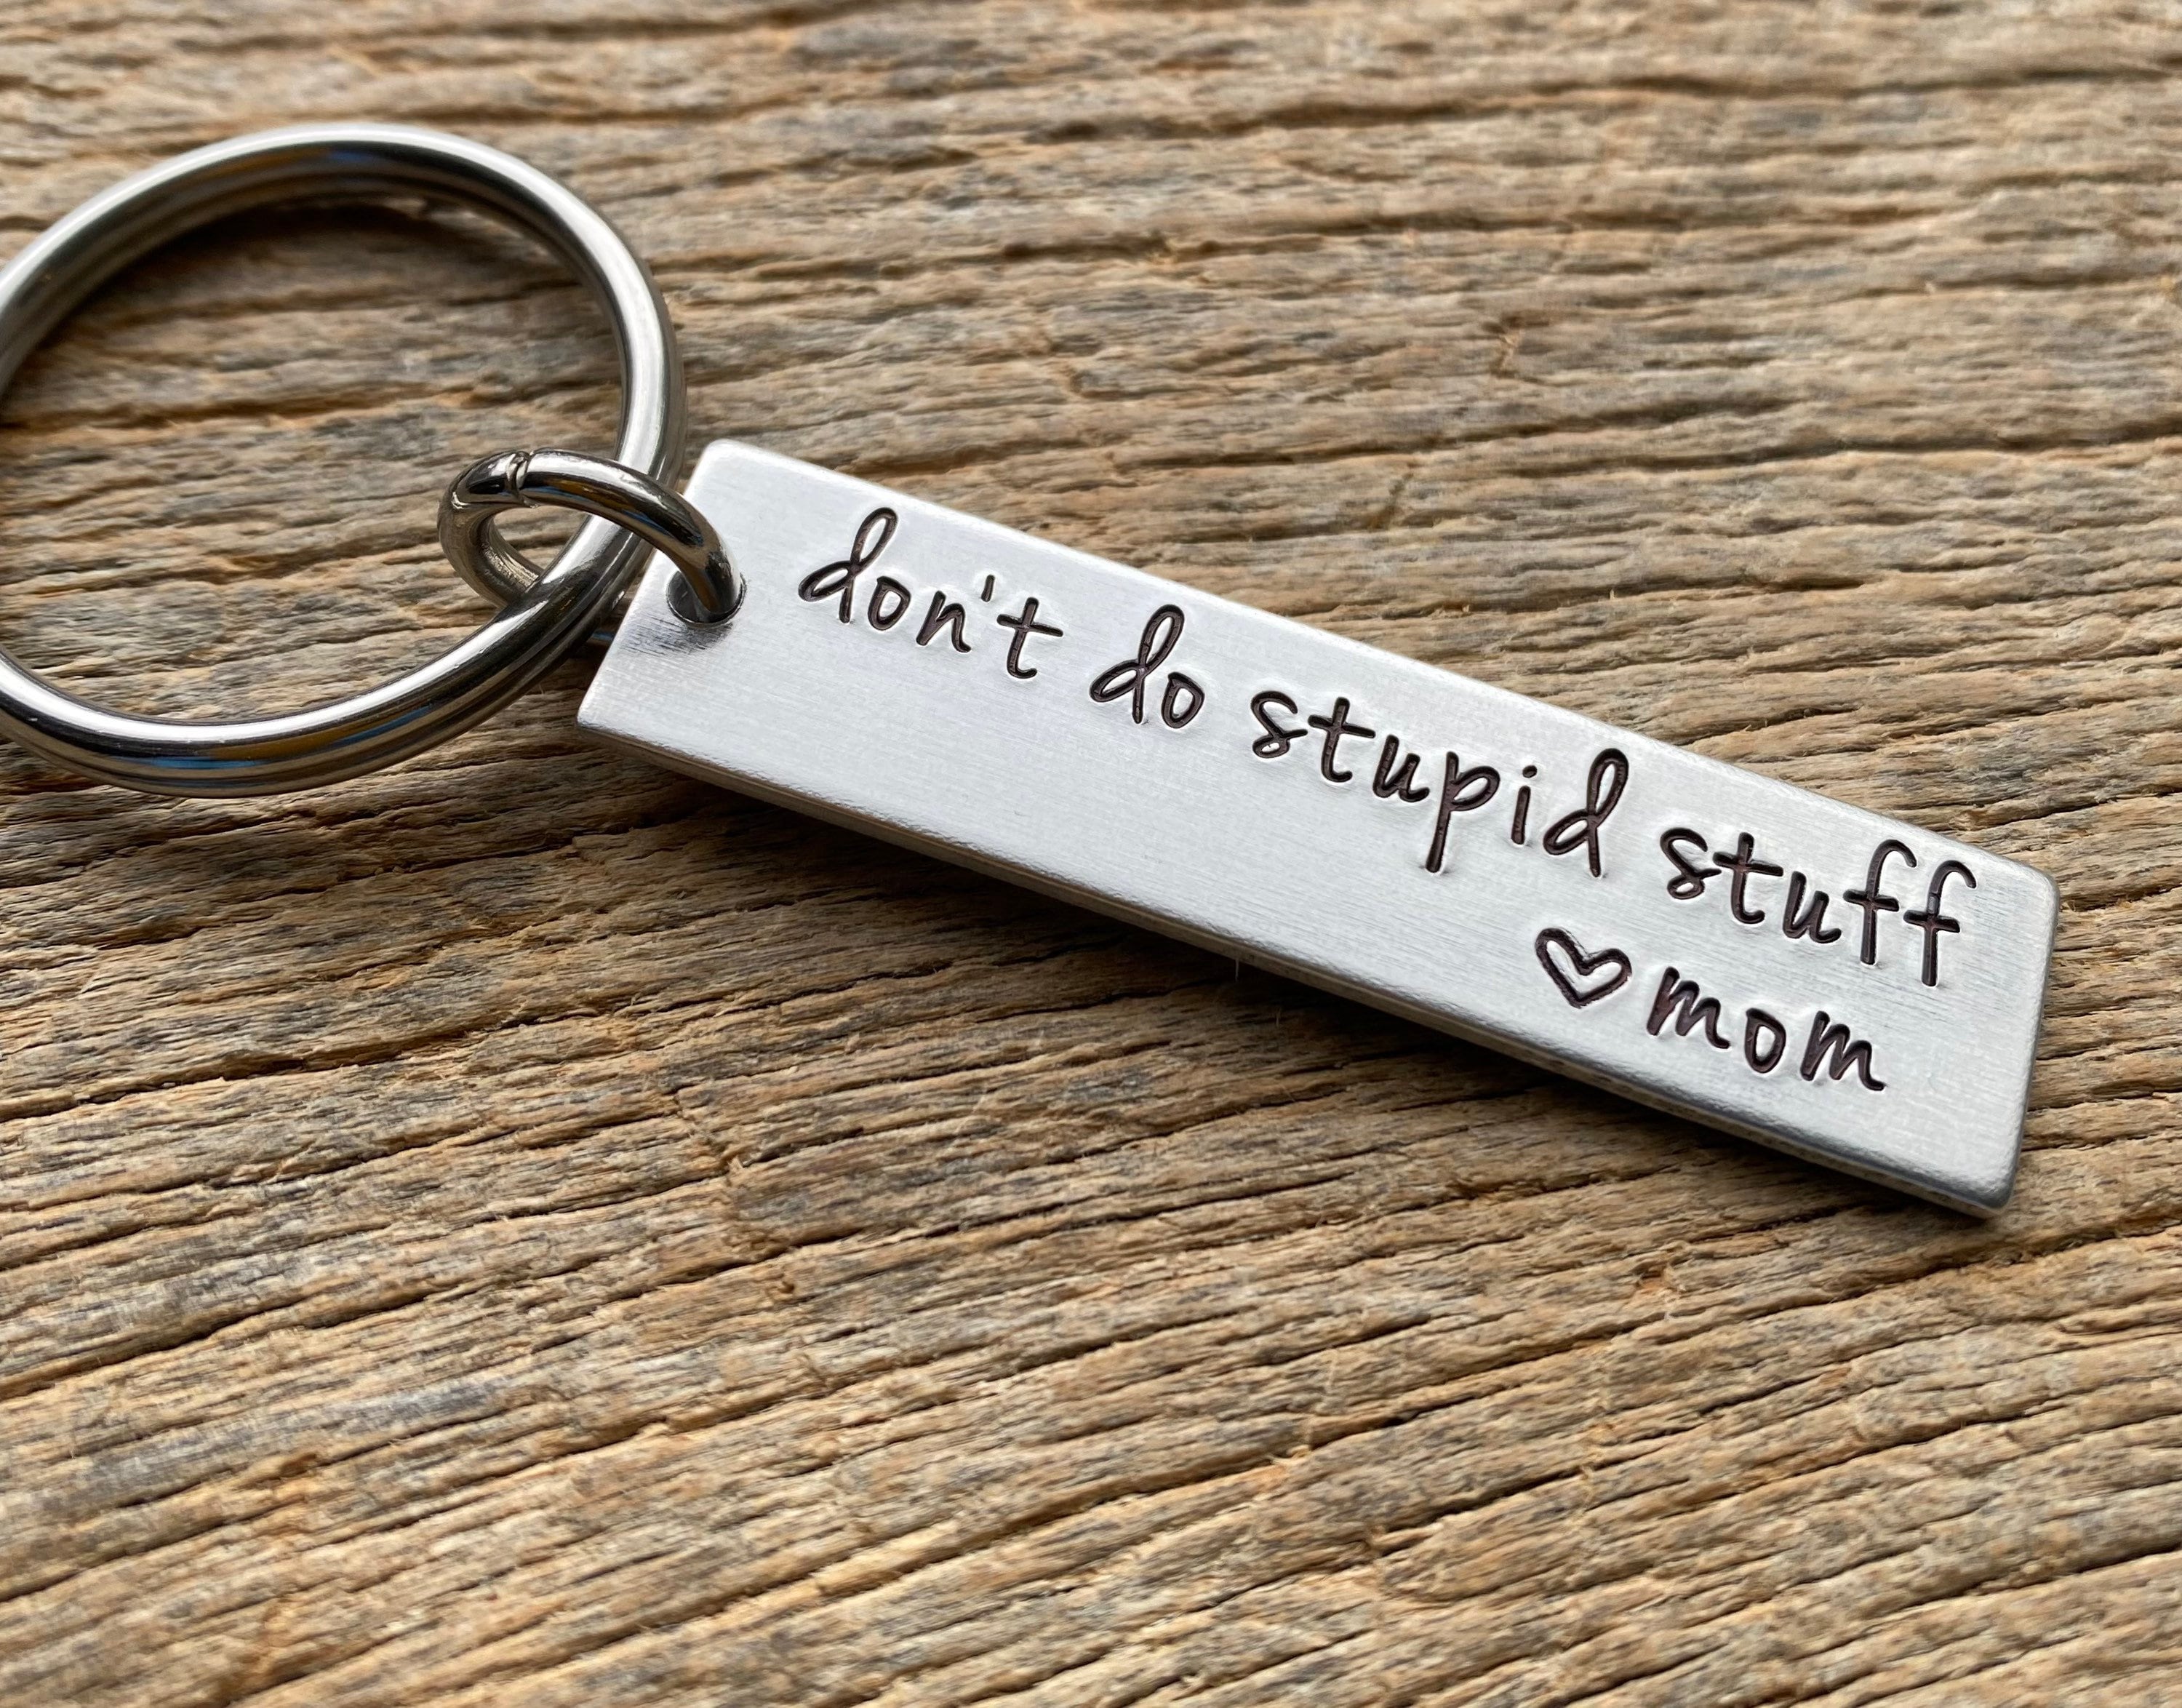 Key Chain - Large Rectangle - Don’t do stupid shit. Love mom